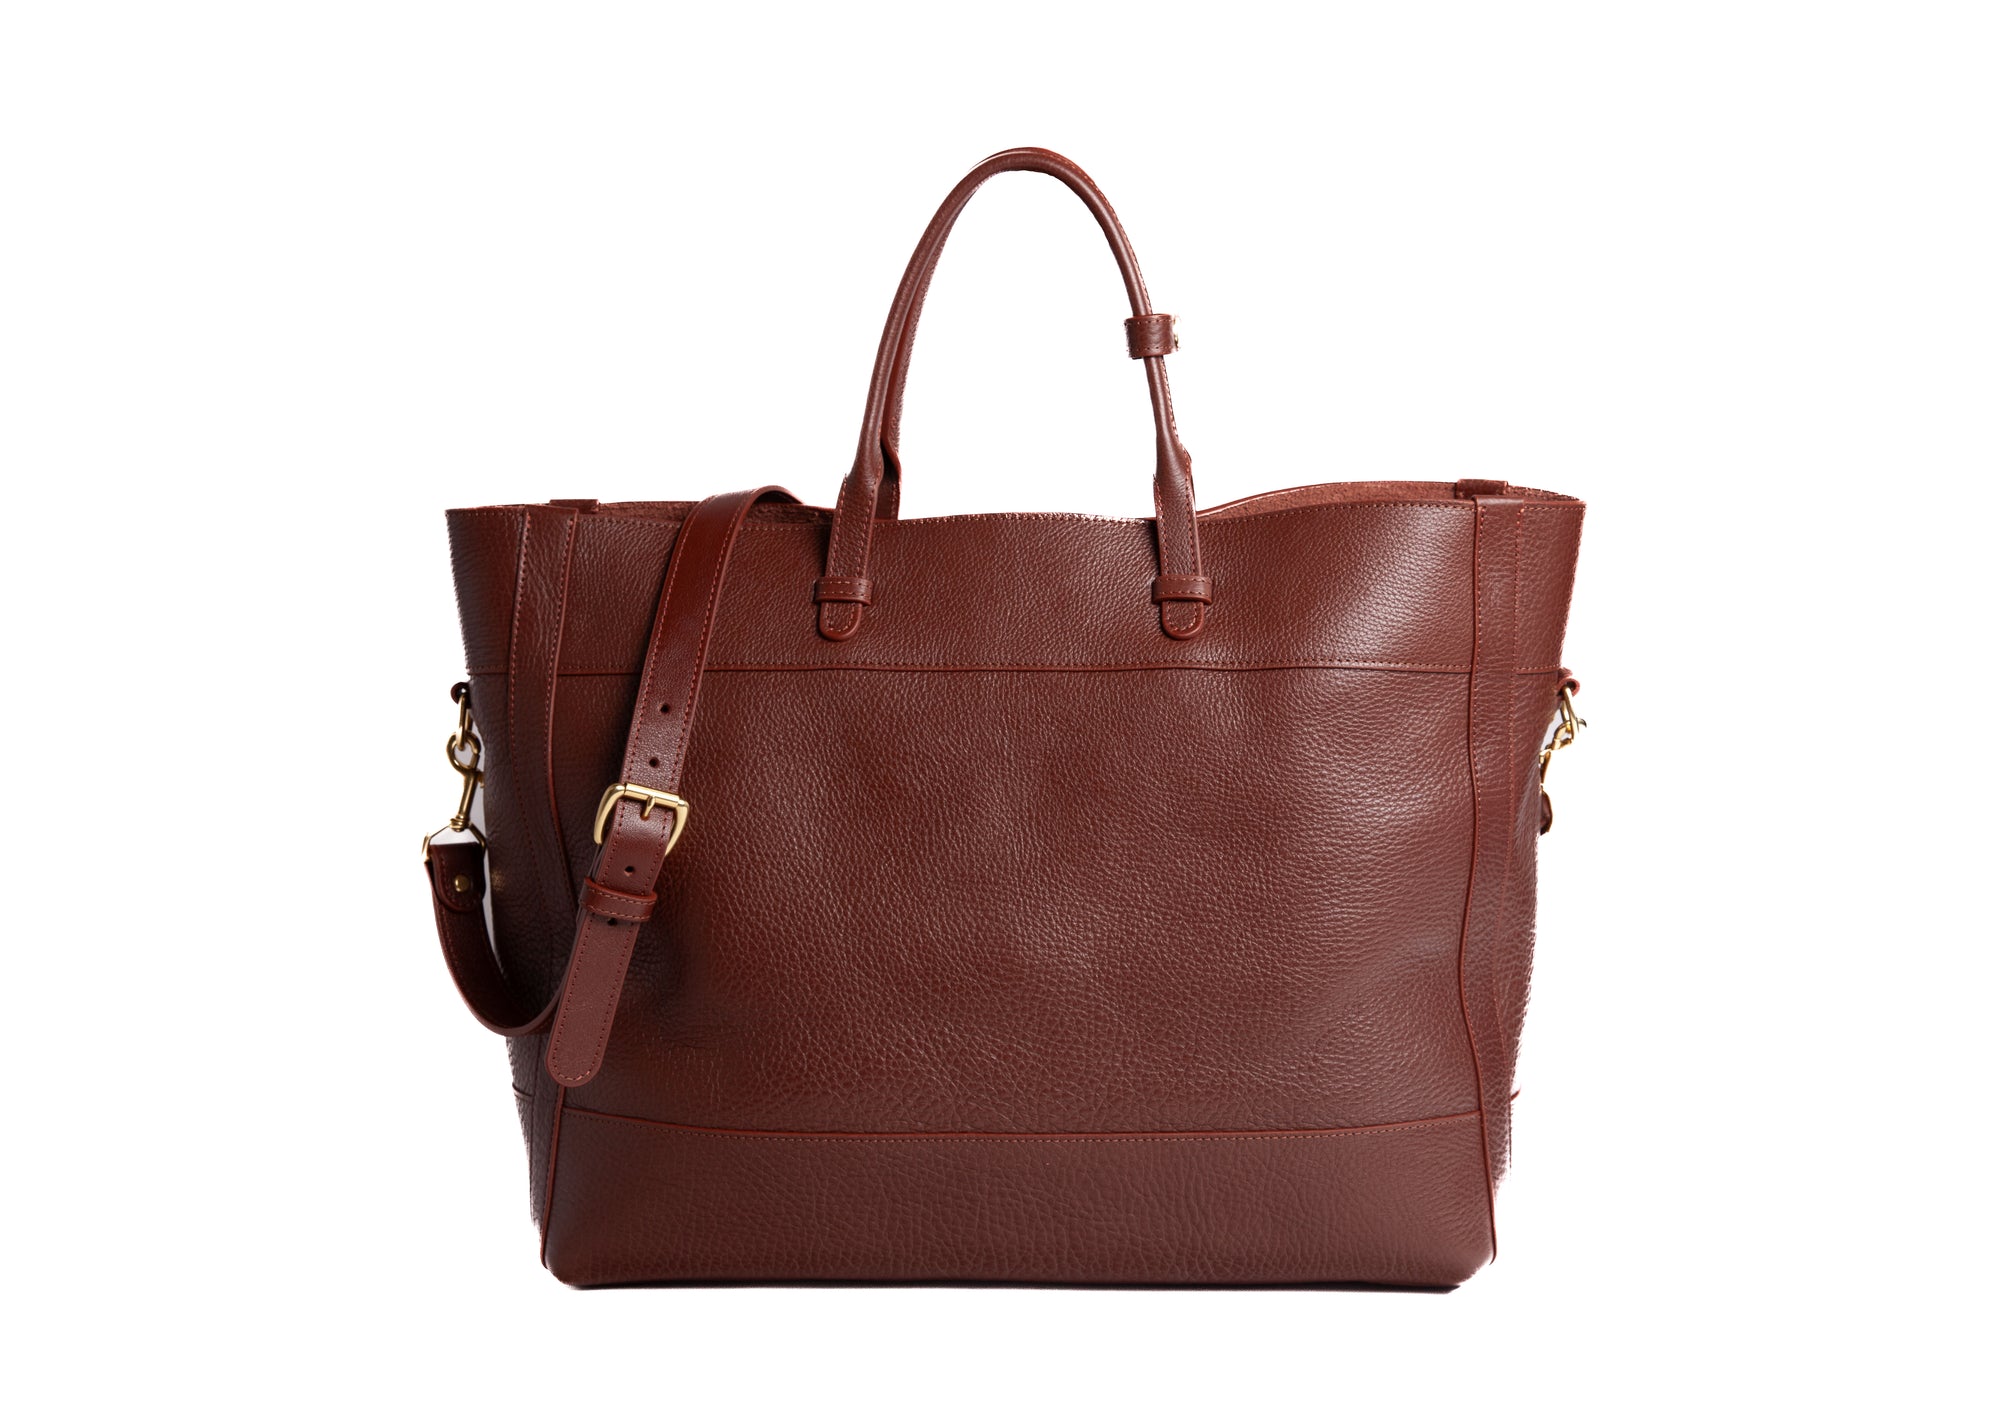 The 929 Tote Chestnut